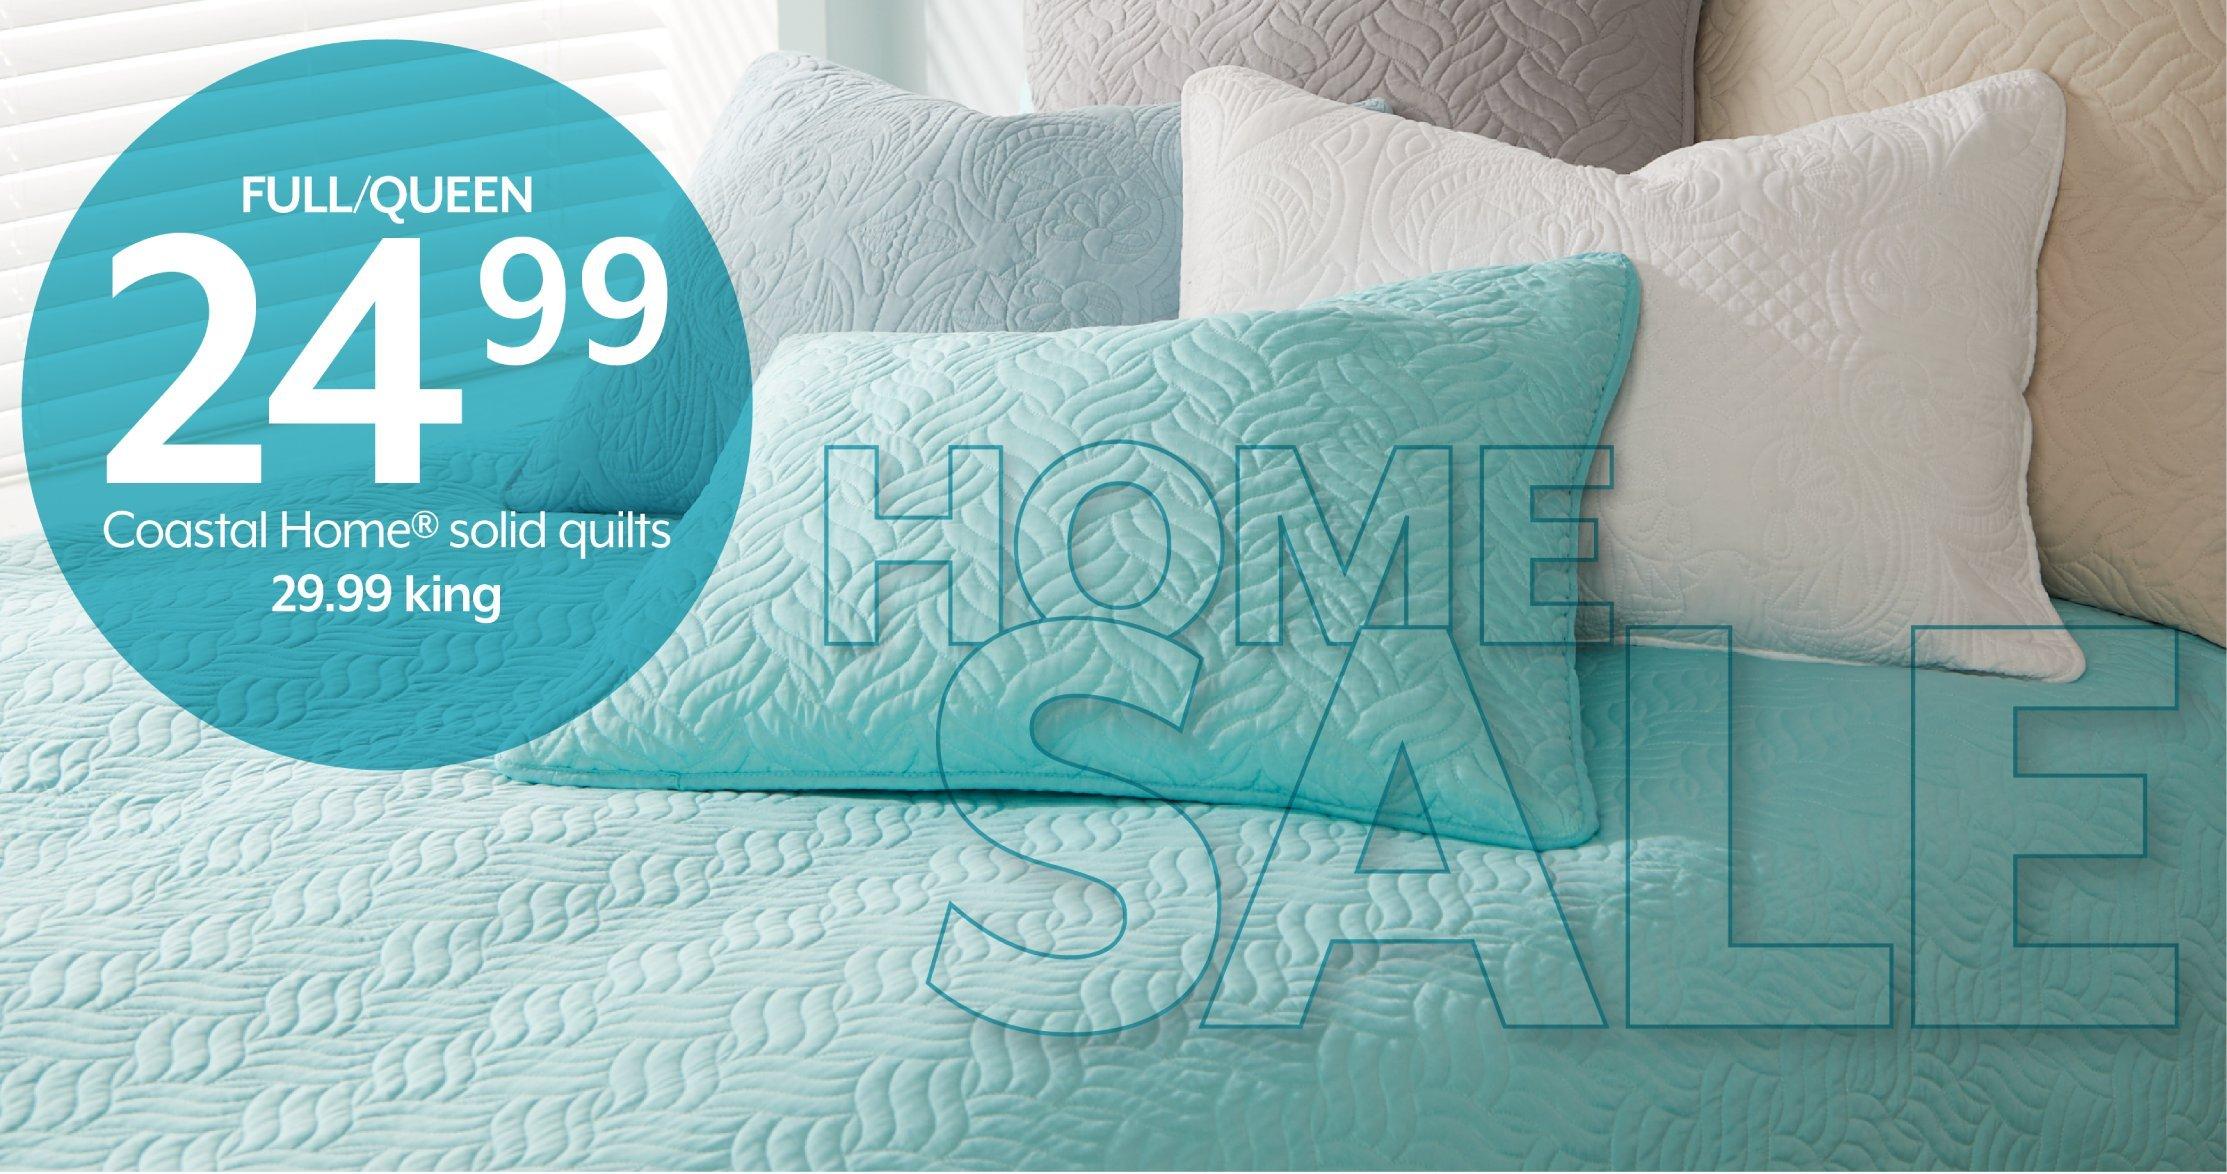 FULL/QUEEN 24.99 Coastal Home® solid quilts 29.99 king